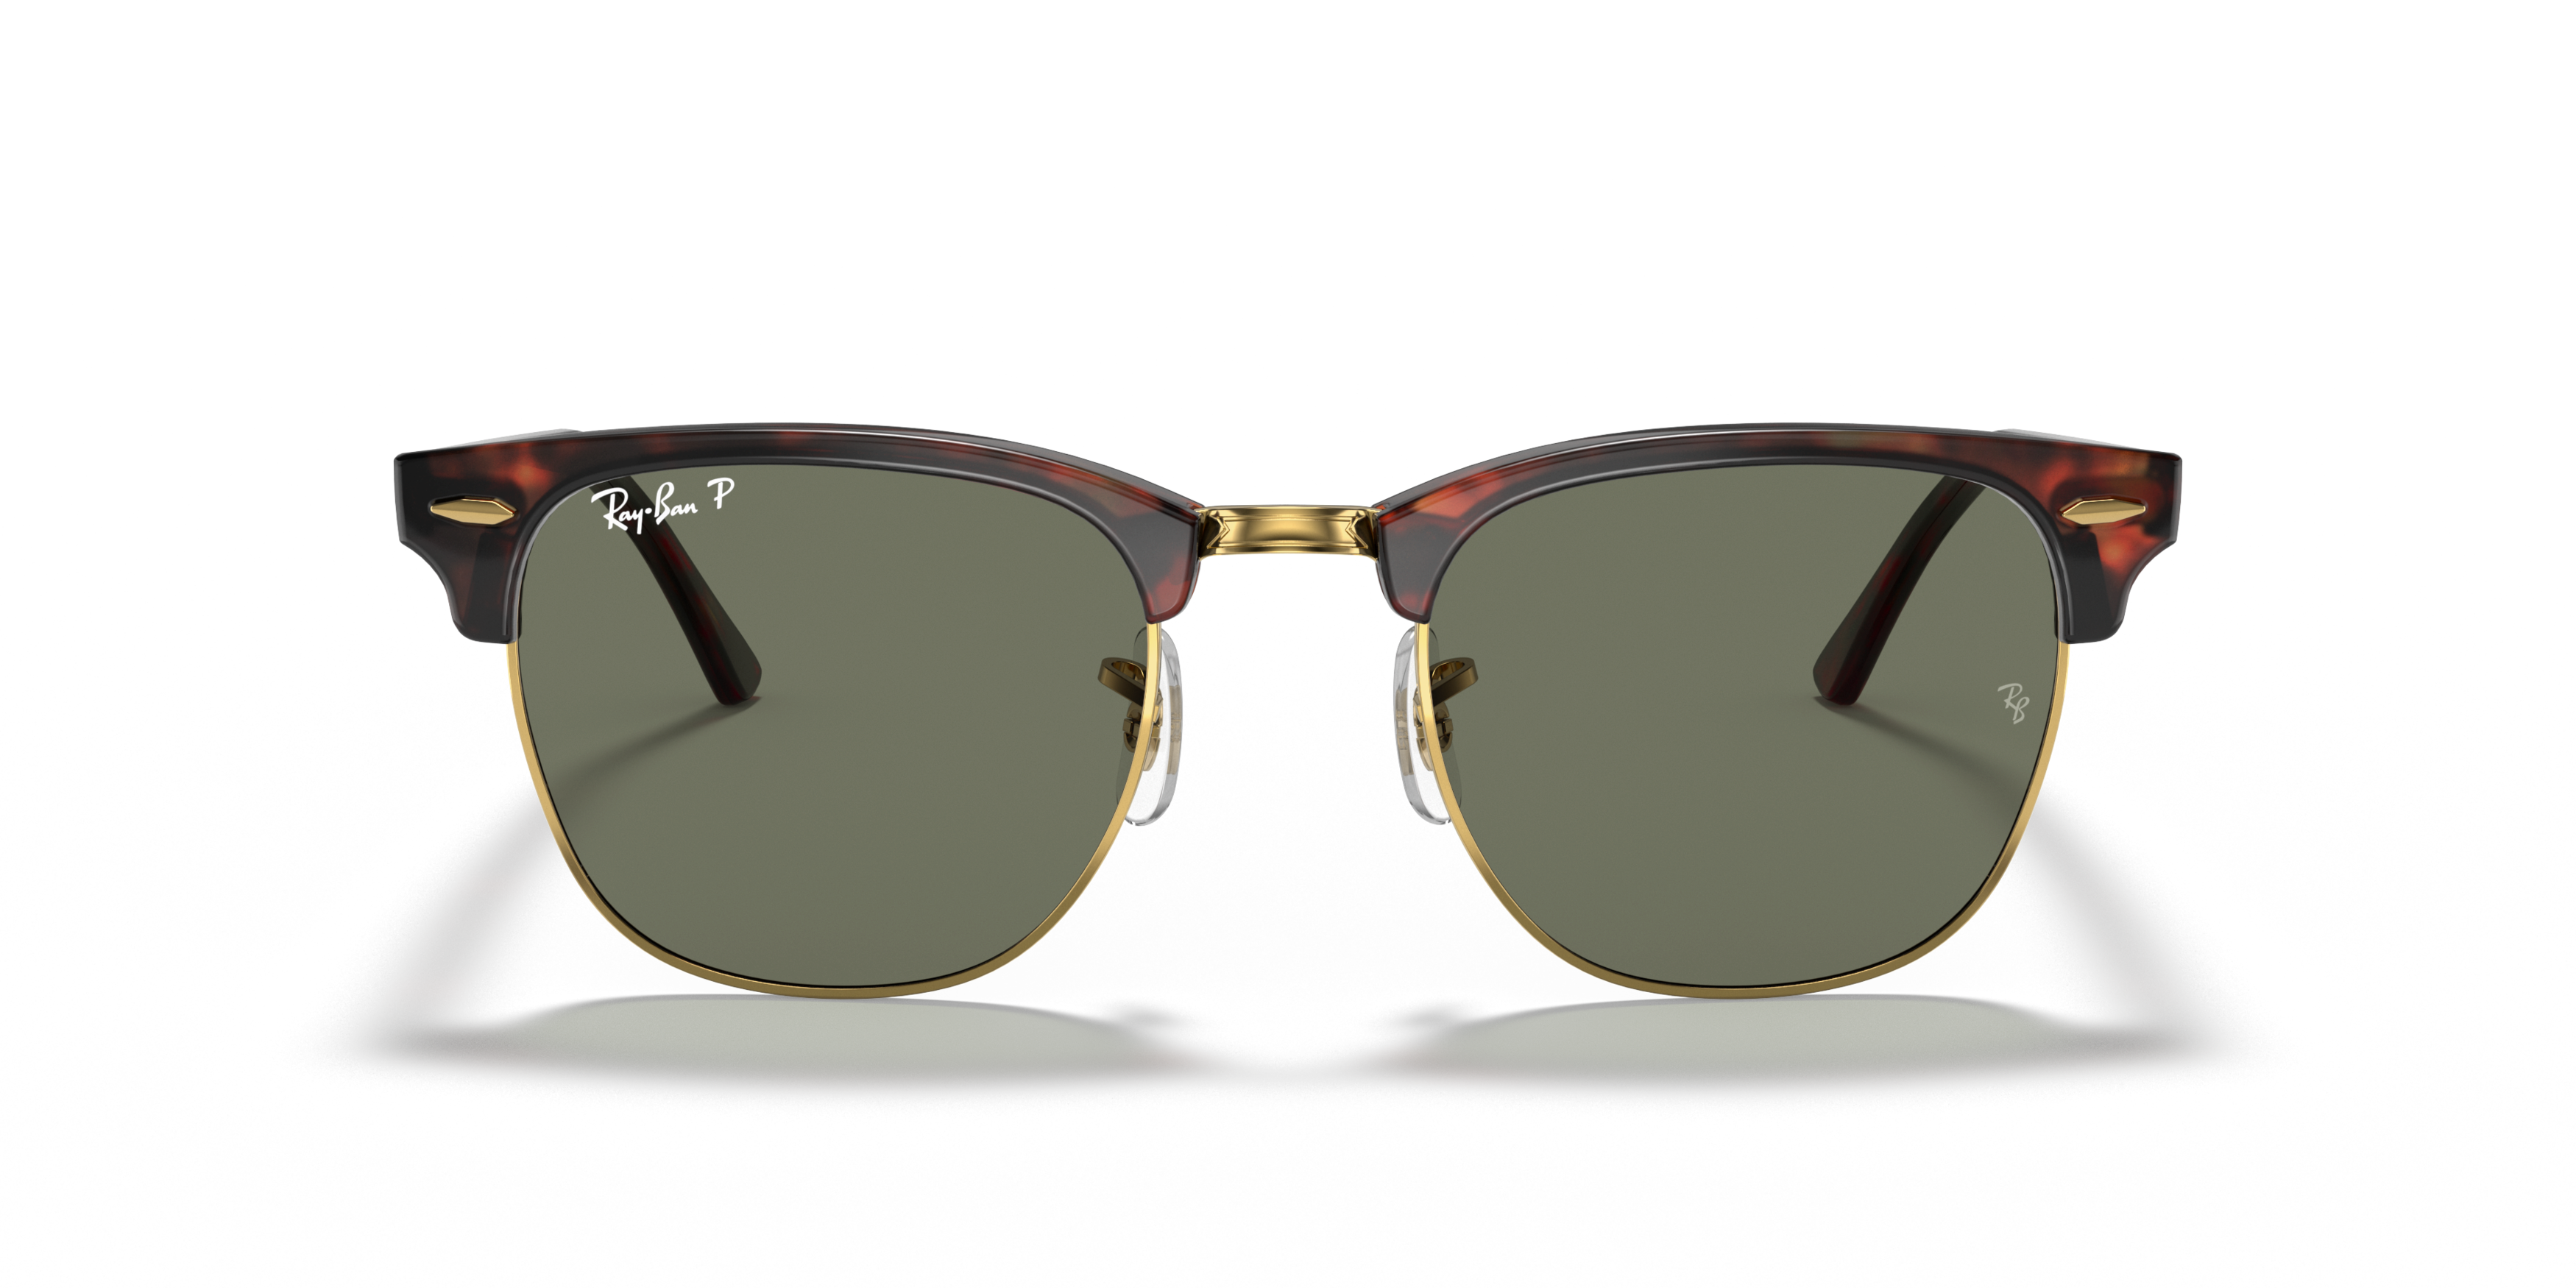 [products.image.front] Ray-Ban Clubmaster 0RB3016 990/58